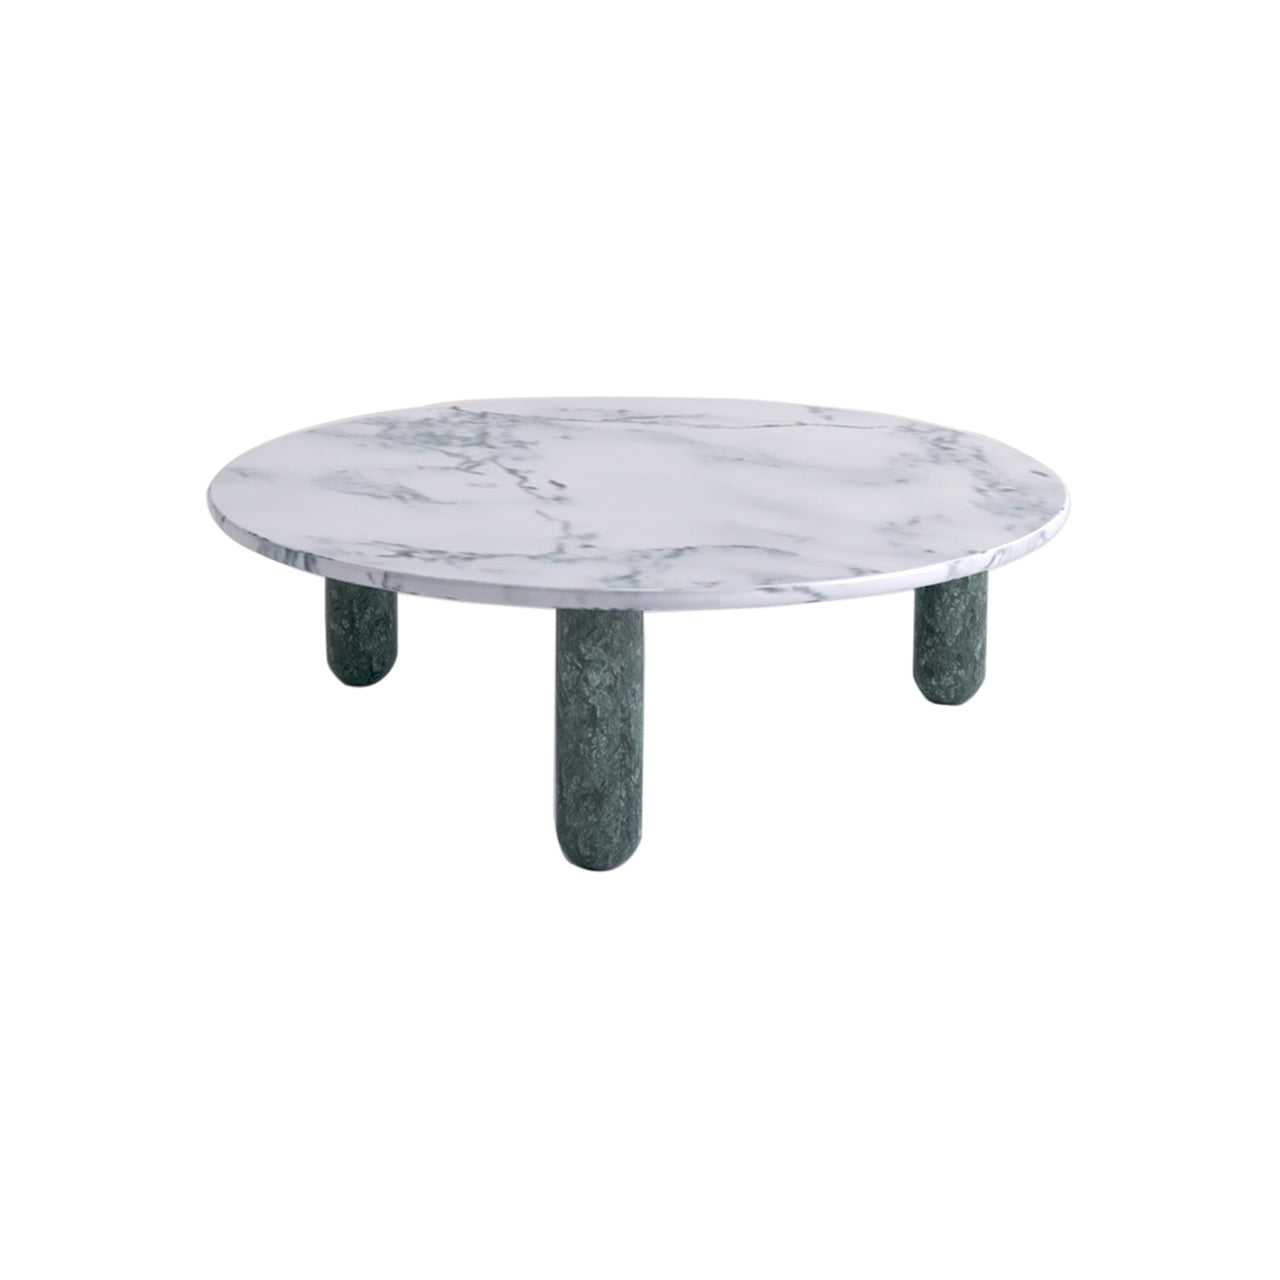 Sunday Coffee Table: Round + Indian Green  Marble + White Pele de Tigre Marble